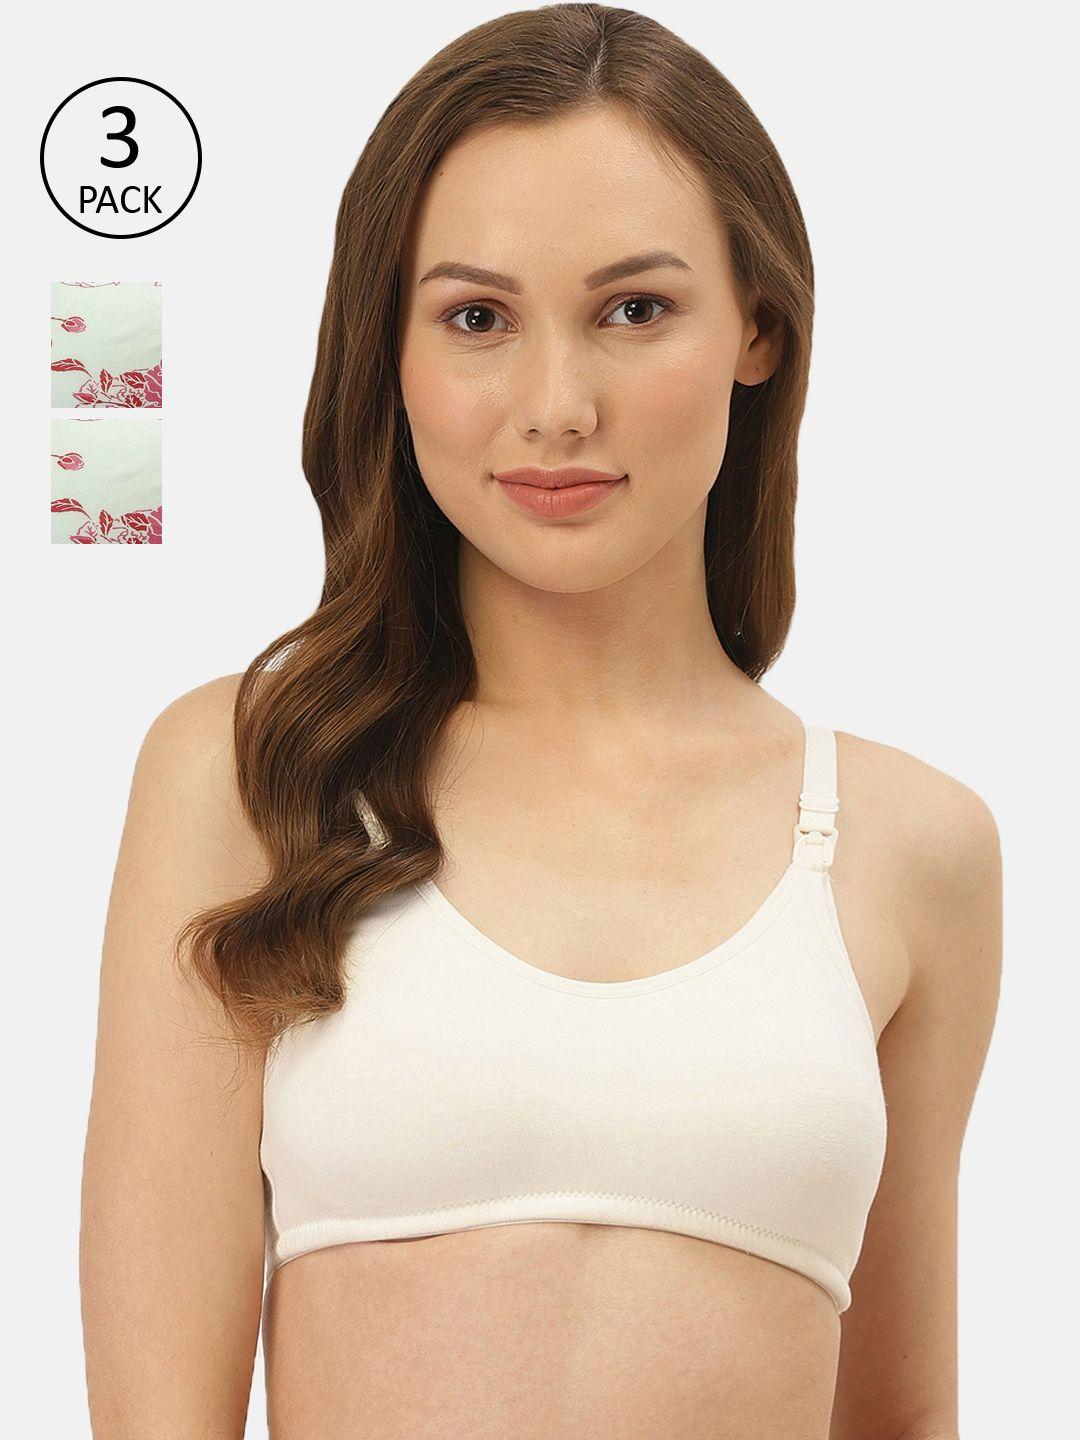 inner-sense-pack-of-2-printed-non-wired-non-padded-sustainable-maternity-bra